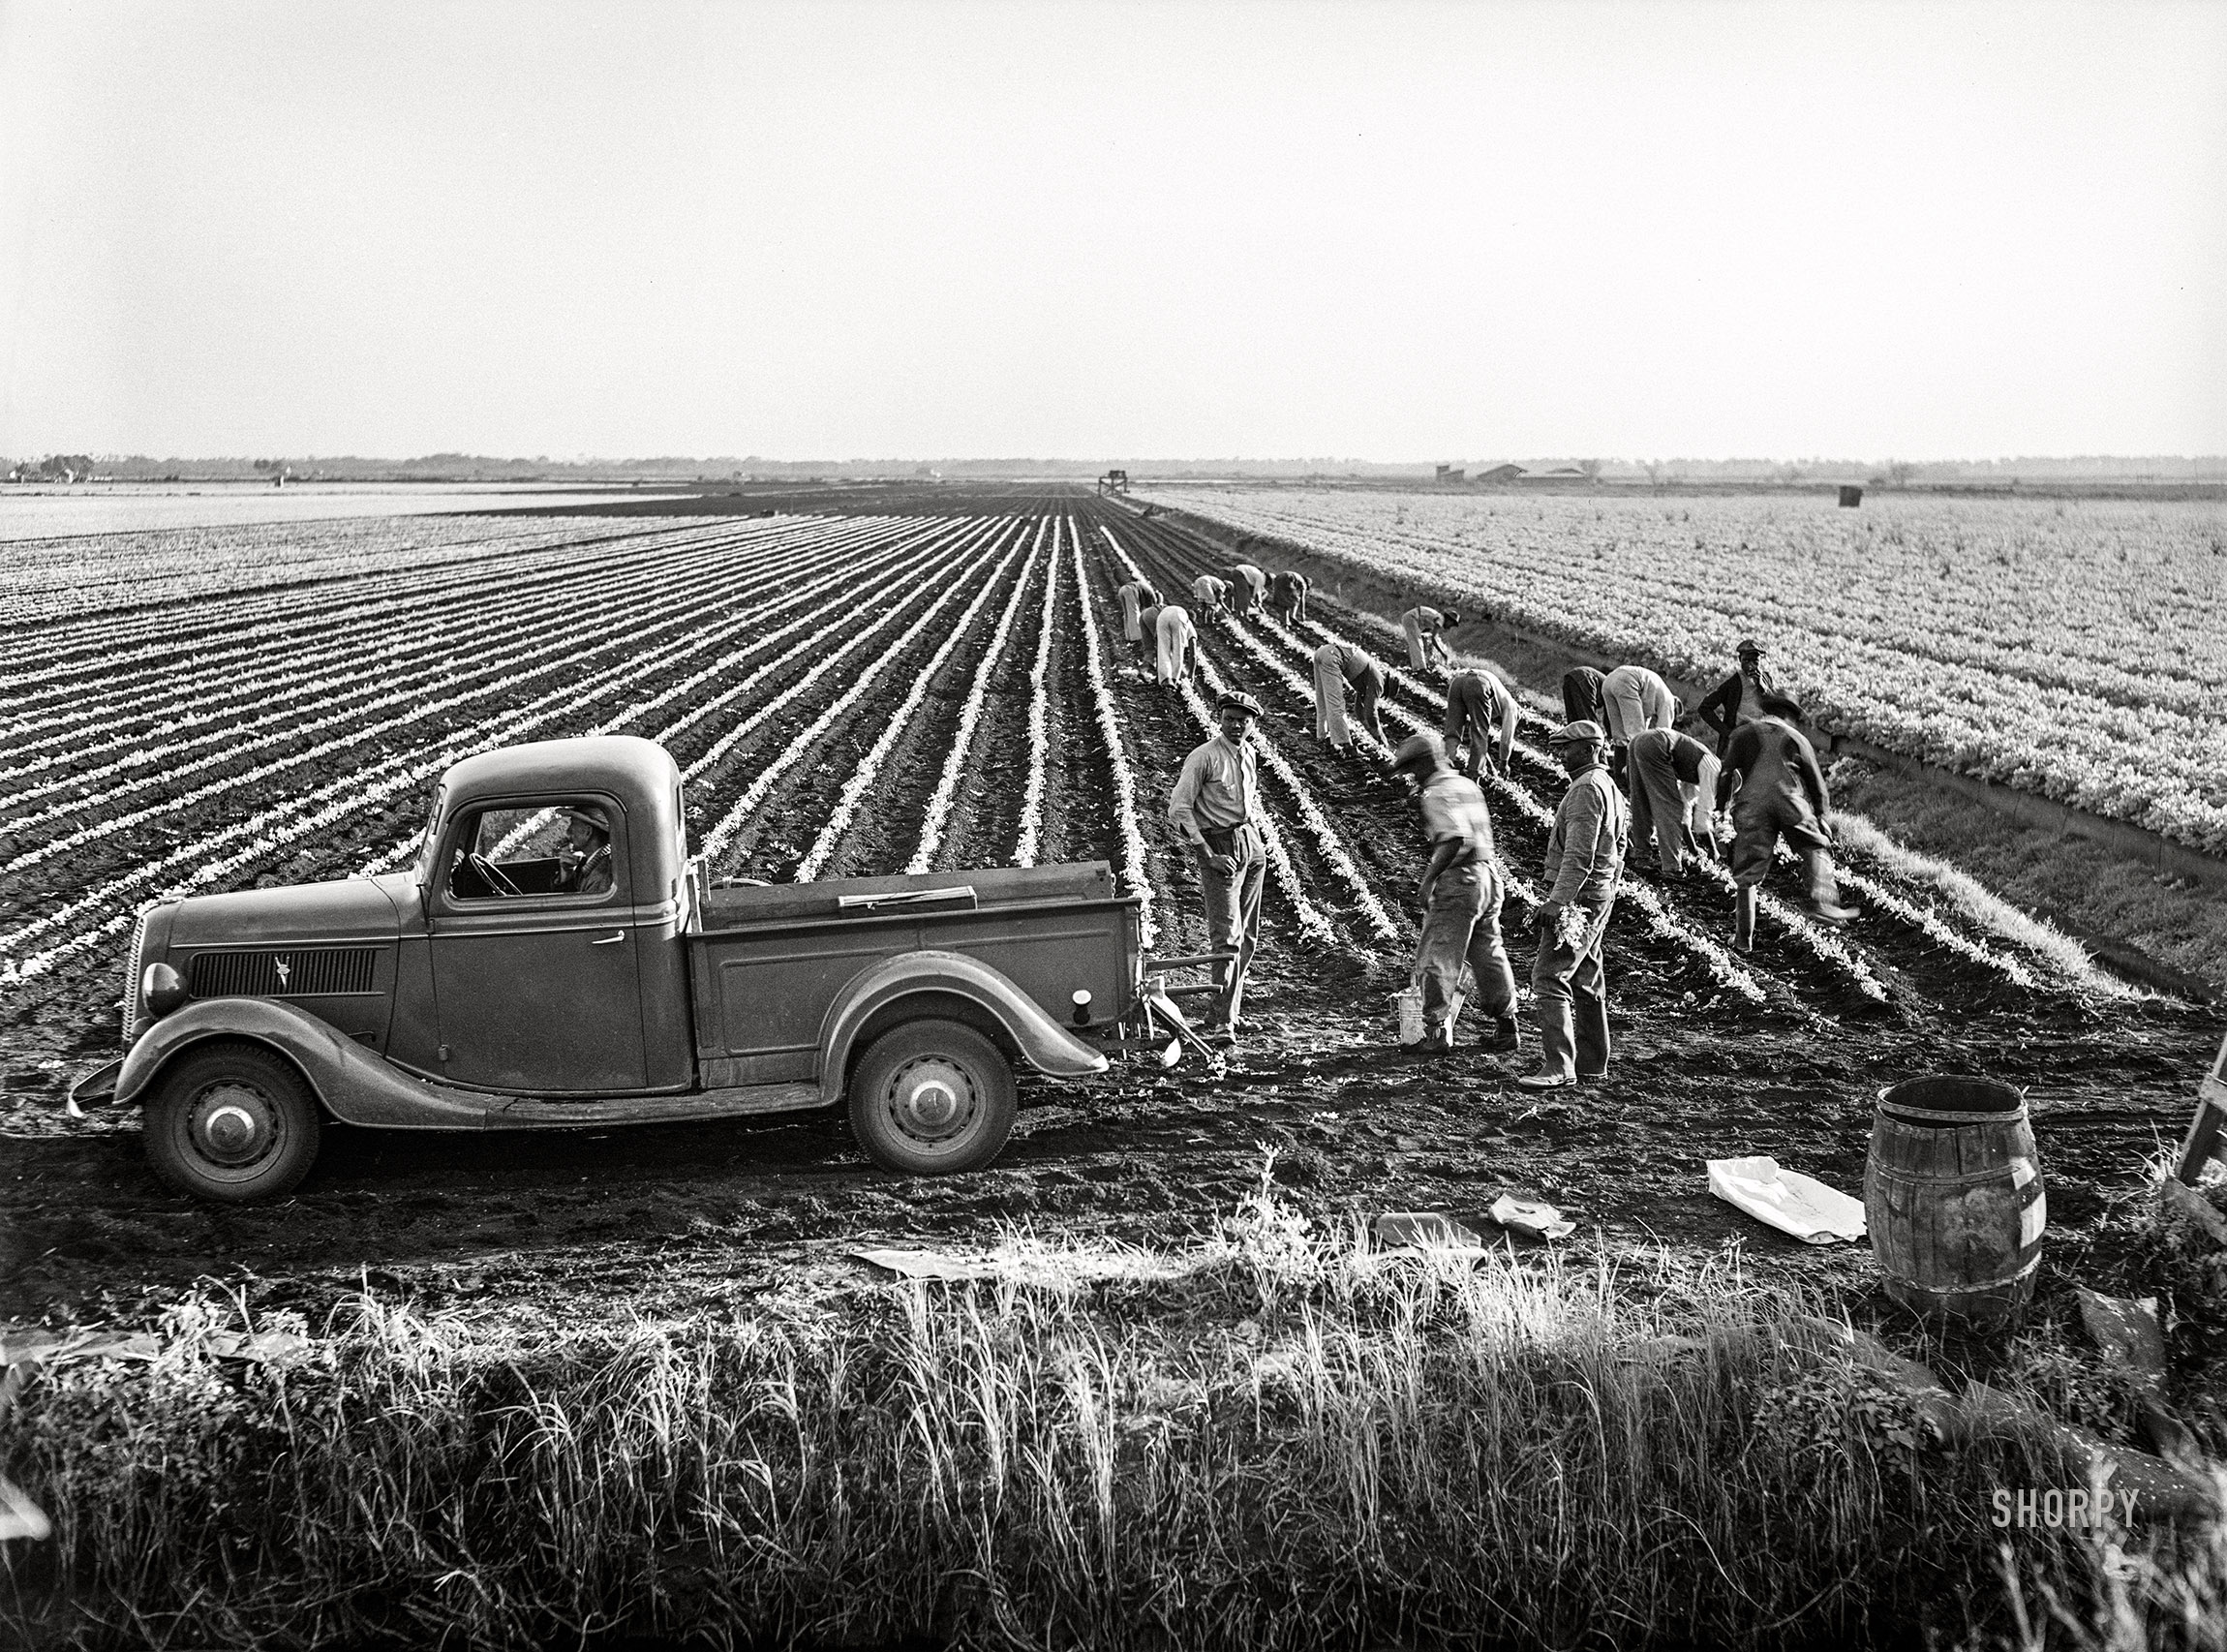 January 1941. "Agricultural day laborers cultivating celery near Sarasota, Florida." Medium format negative by Marion Post Wolcott for the Farm Security Administration. View full size.